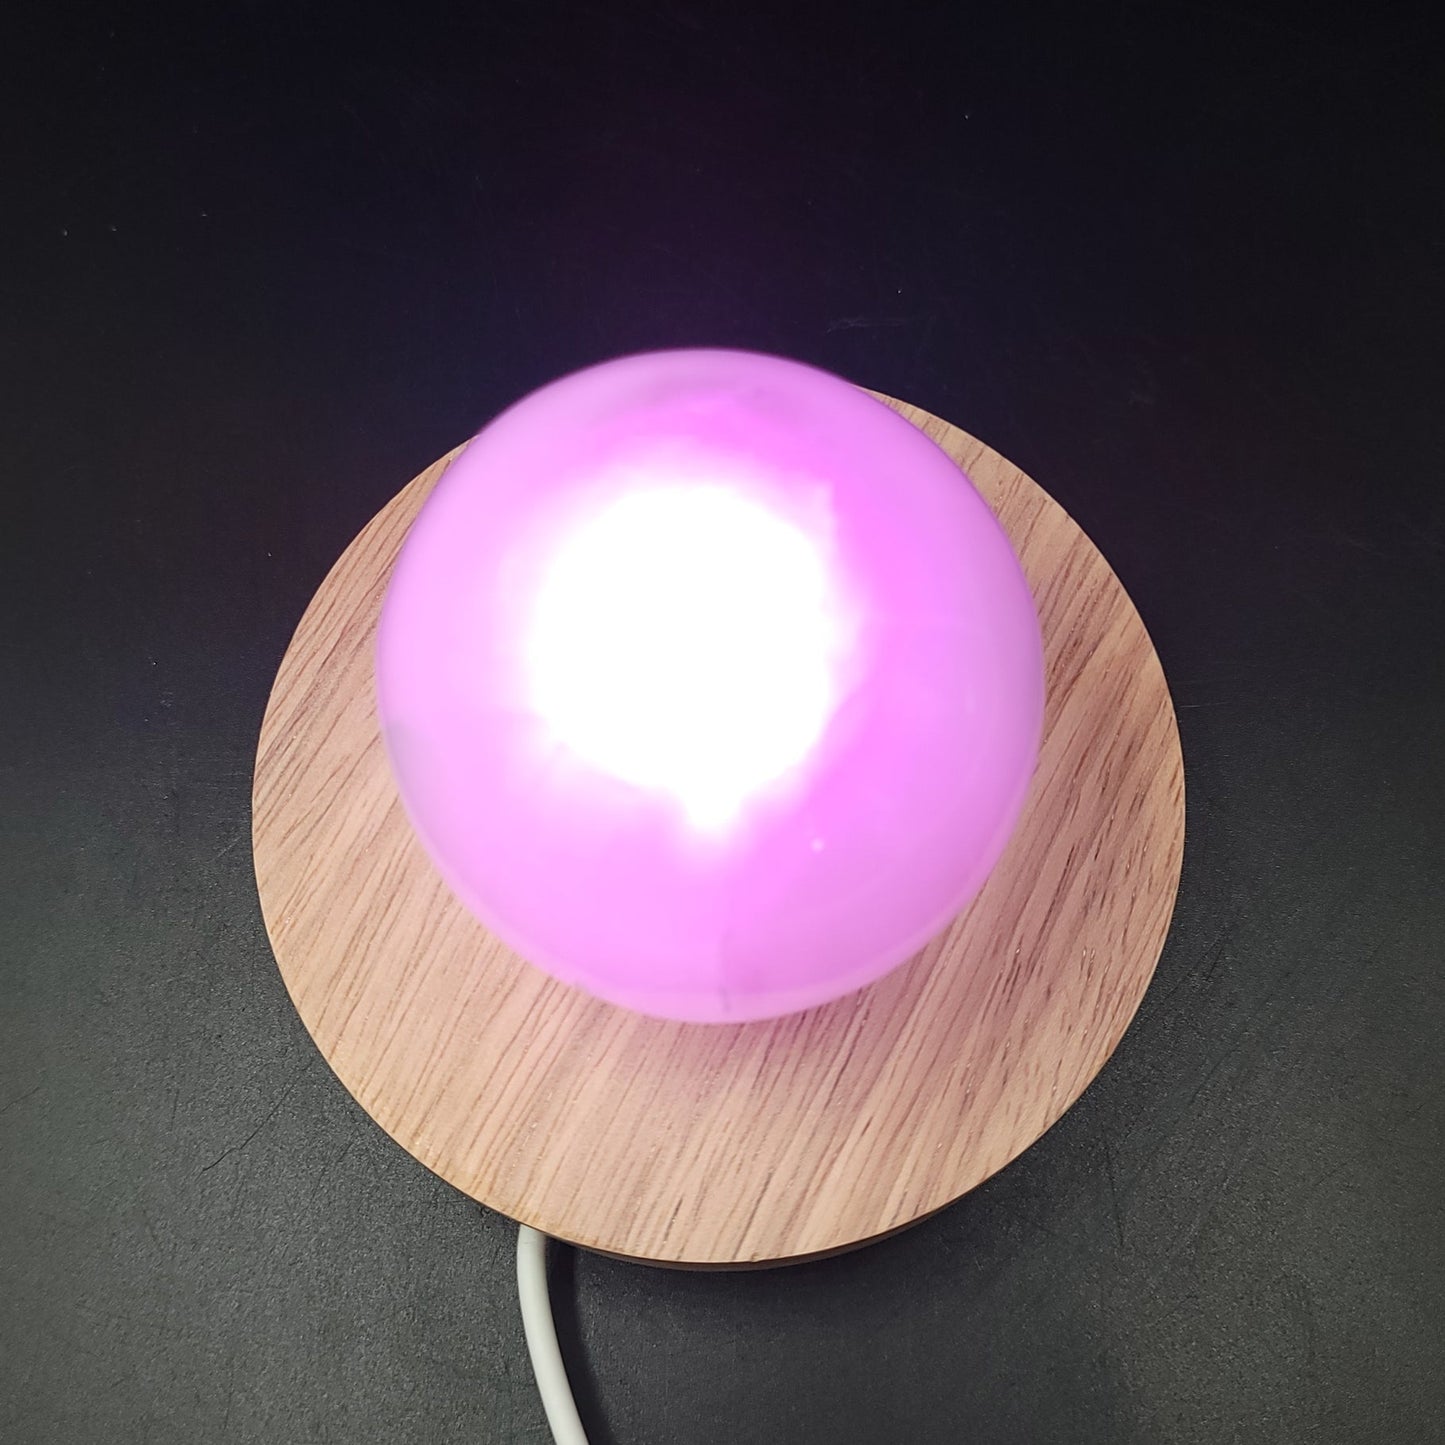 LED Light Wooden Round Base w/ Remote Control - Elevated Metaphysical